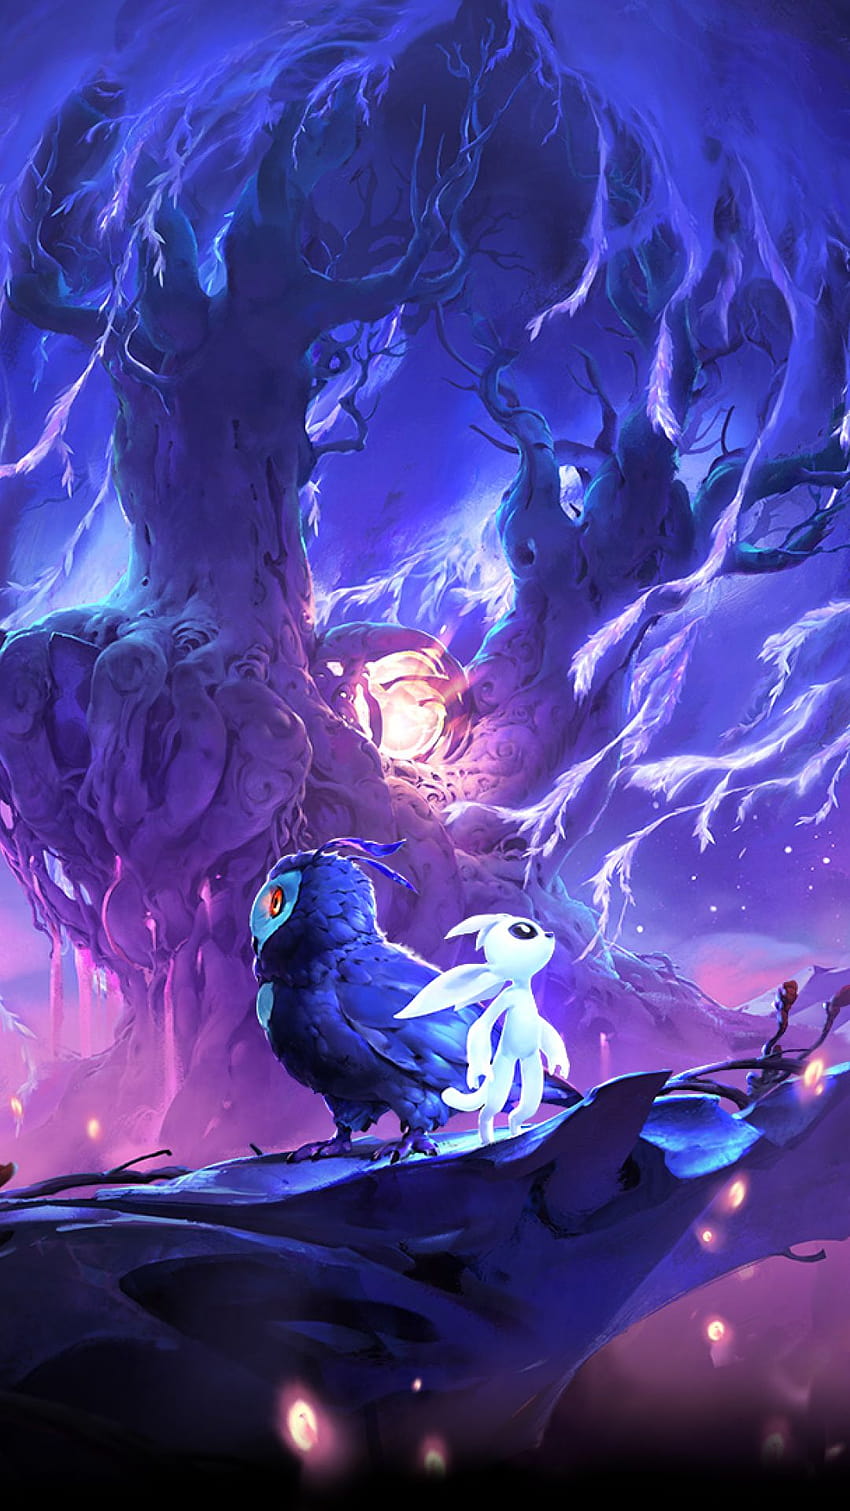 1080x1920 Ori and The Will Of The Wisps Iphone 7, 6s, 6 Plus и Pixel XL, One Plus 3, 3t, 5, игри и фонове, ori android HD тапет за телефон